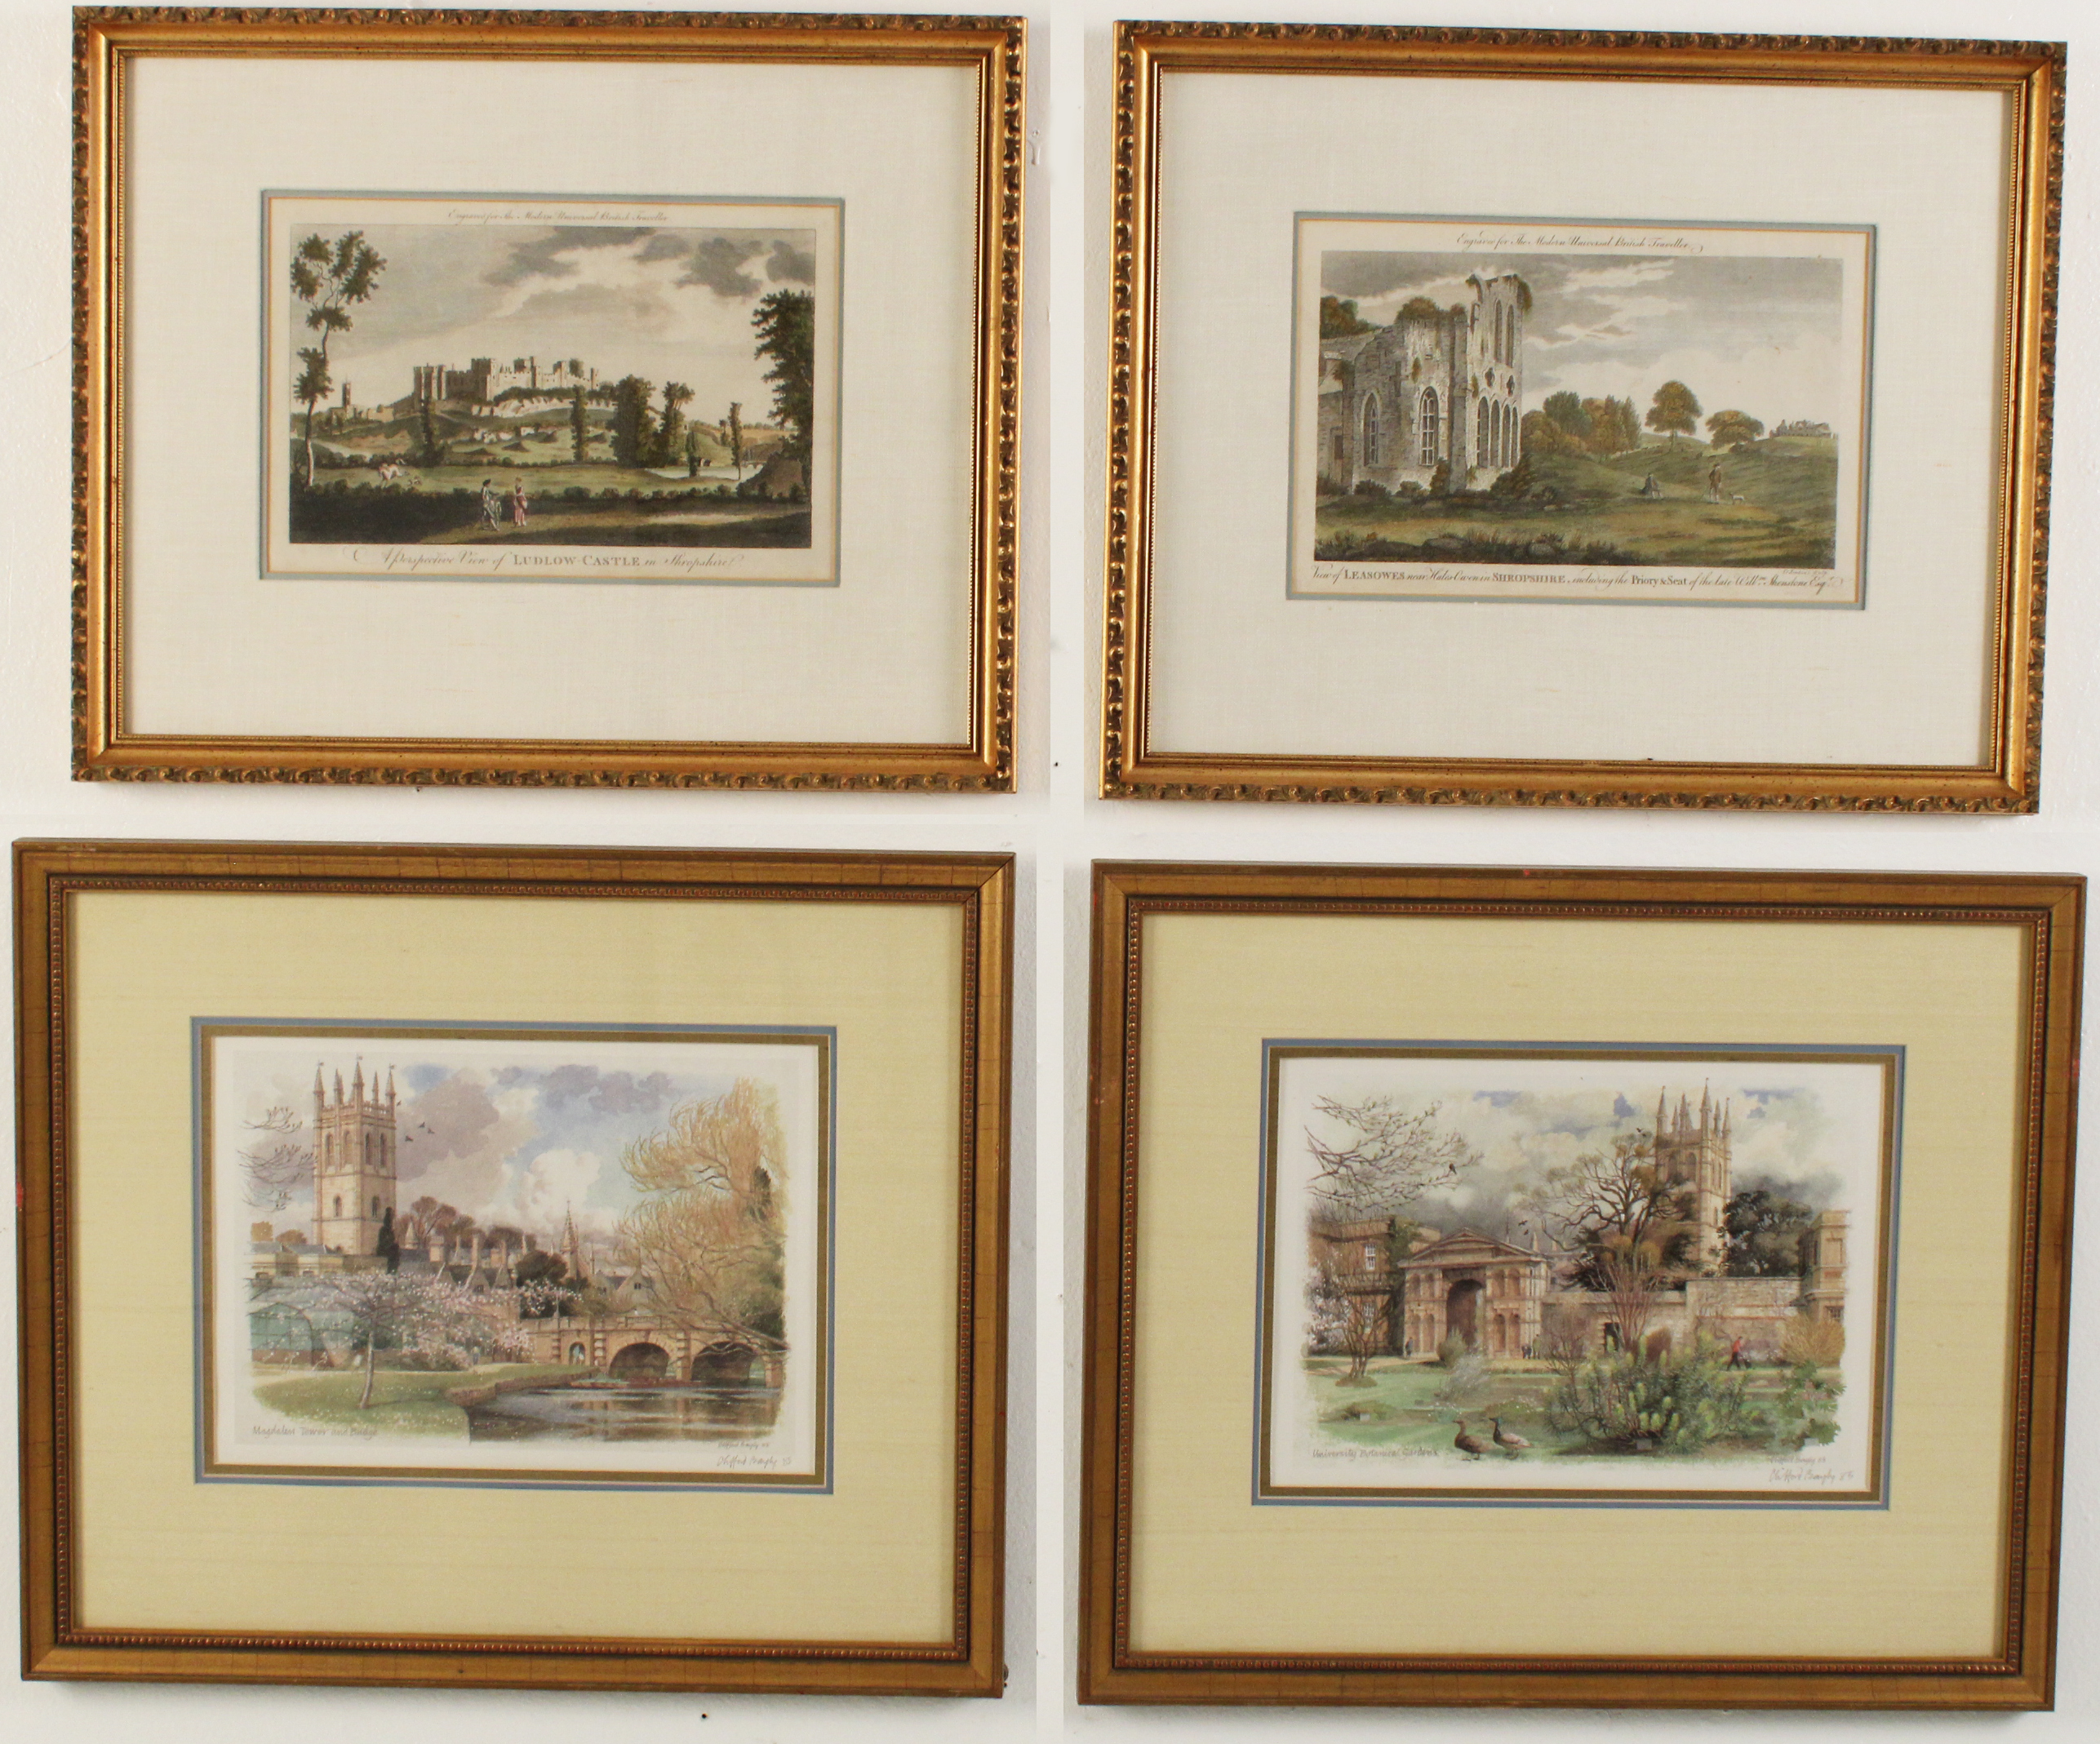 2 PAIRS OF FRAMED ART 2 PAIRS OF